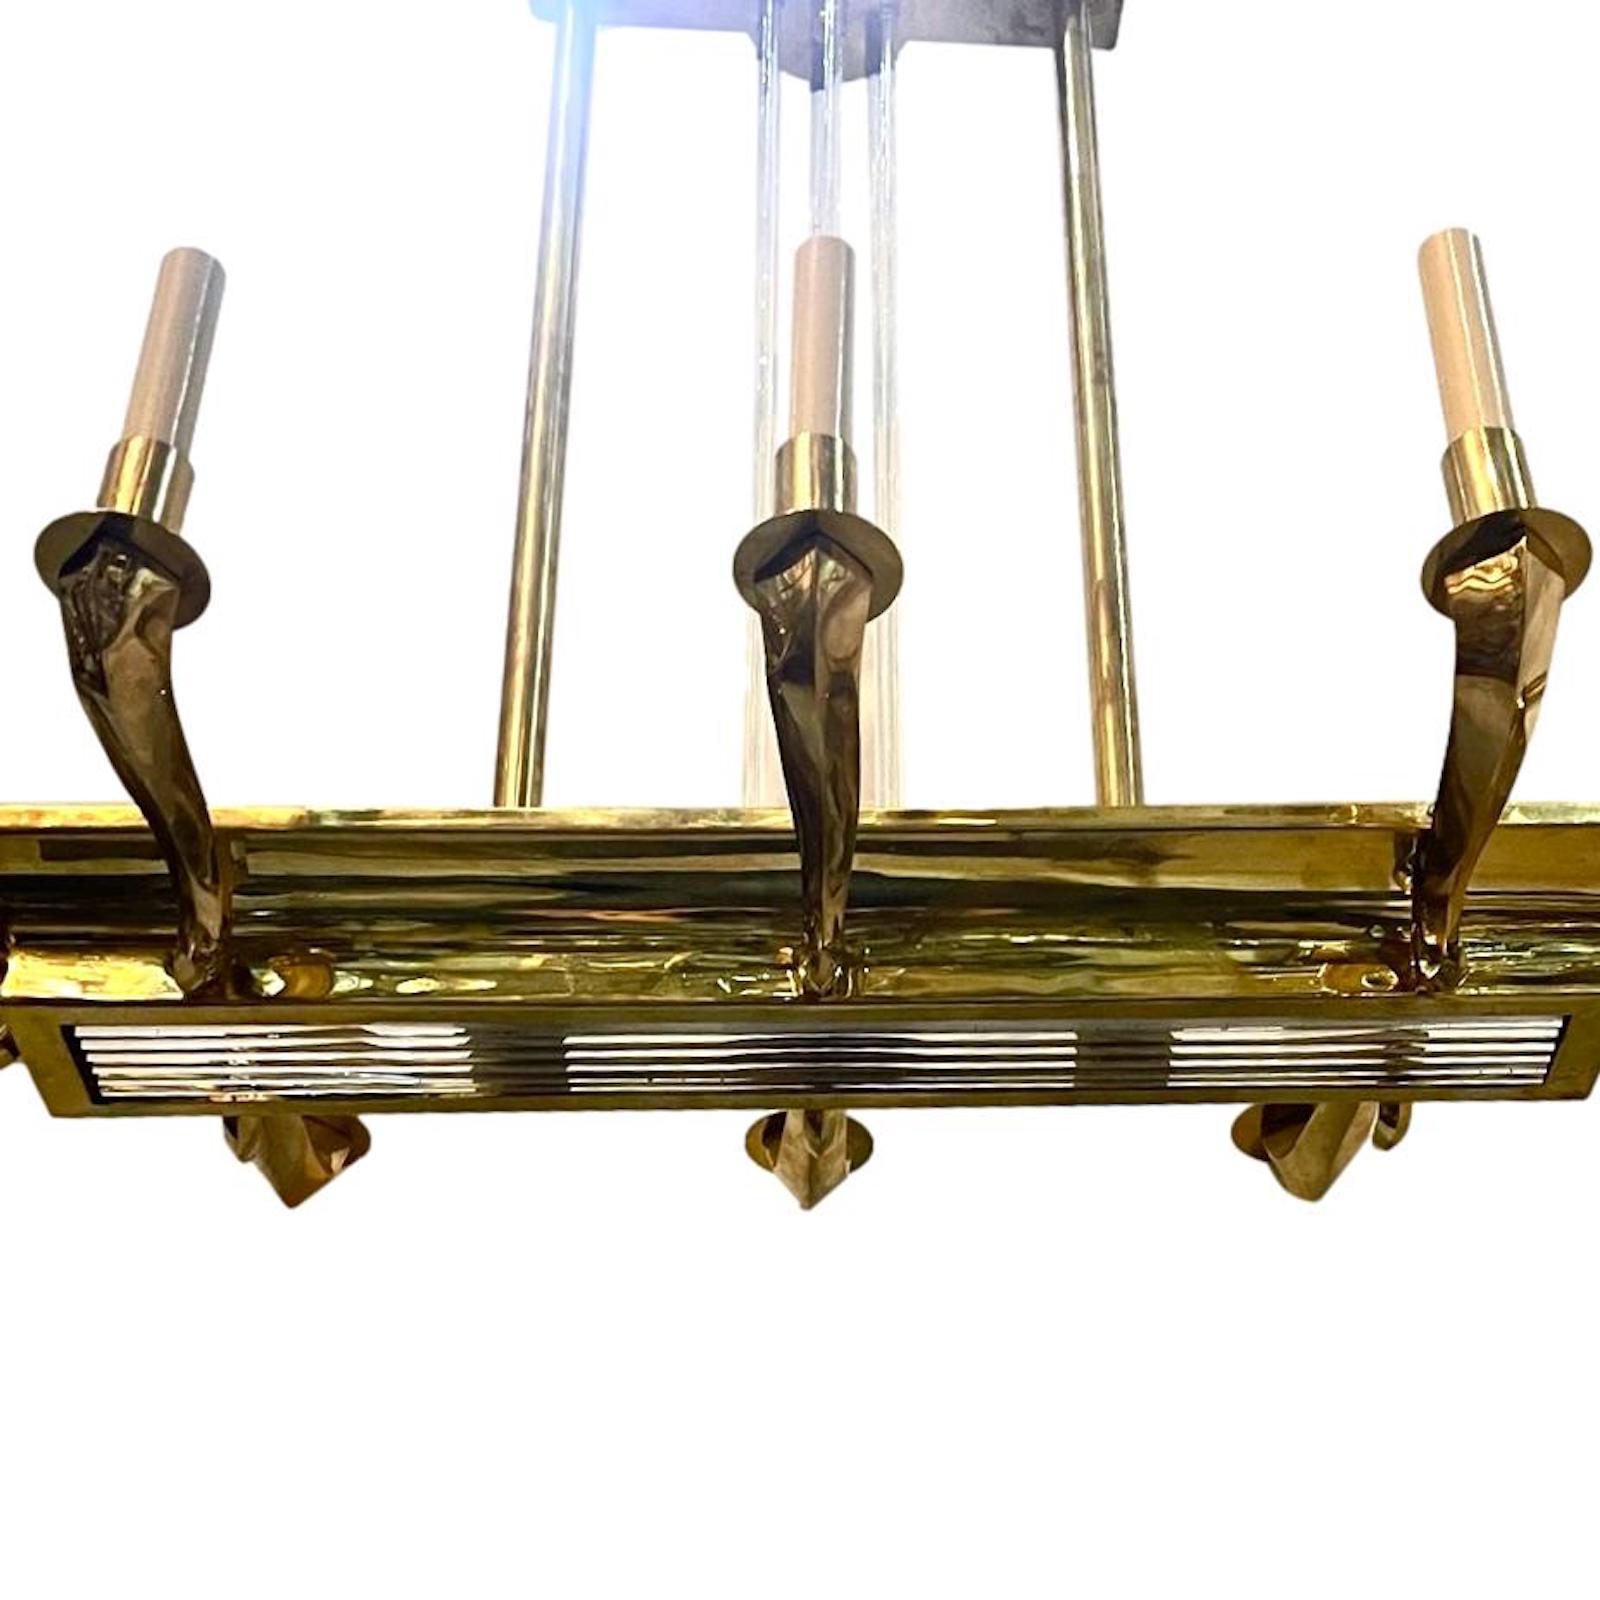 A circa 1960's gilt bronze moderne style eight-arm French chandelier with two interior lights and glass rods insets.

Measurements:
Length: 36